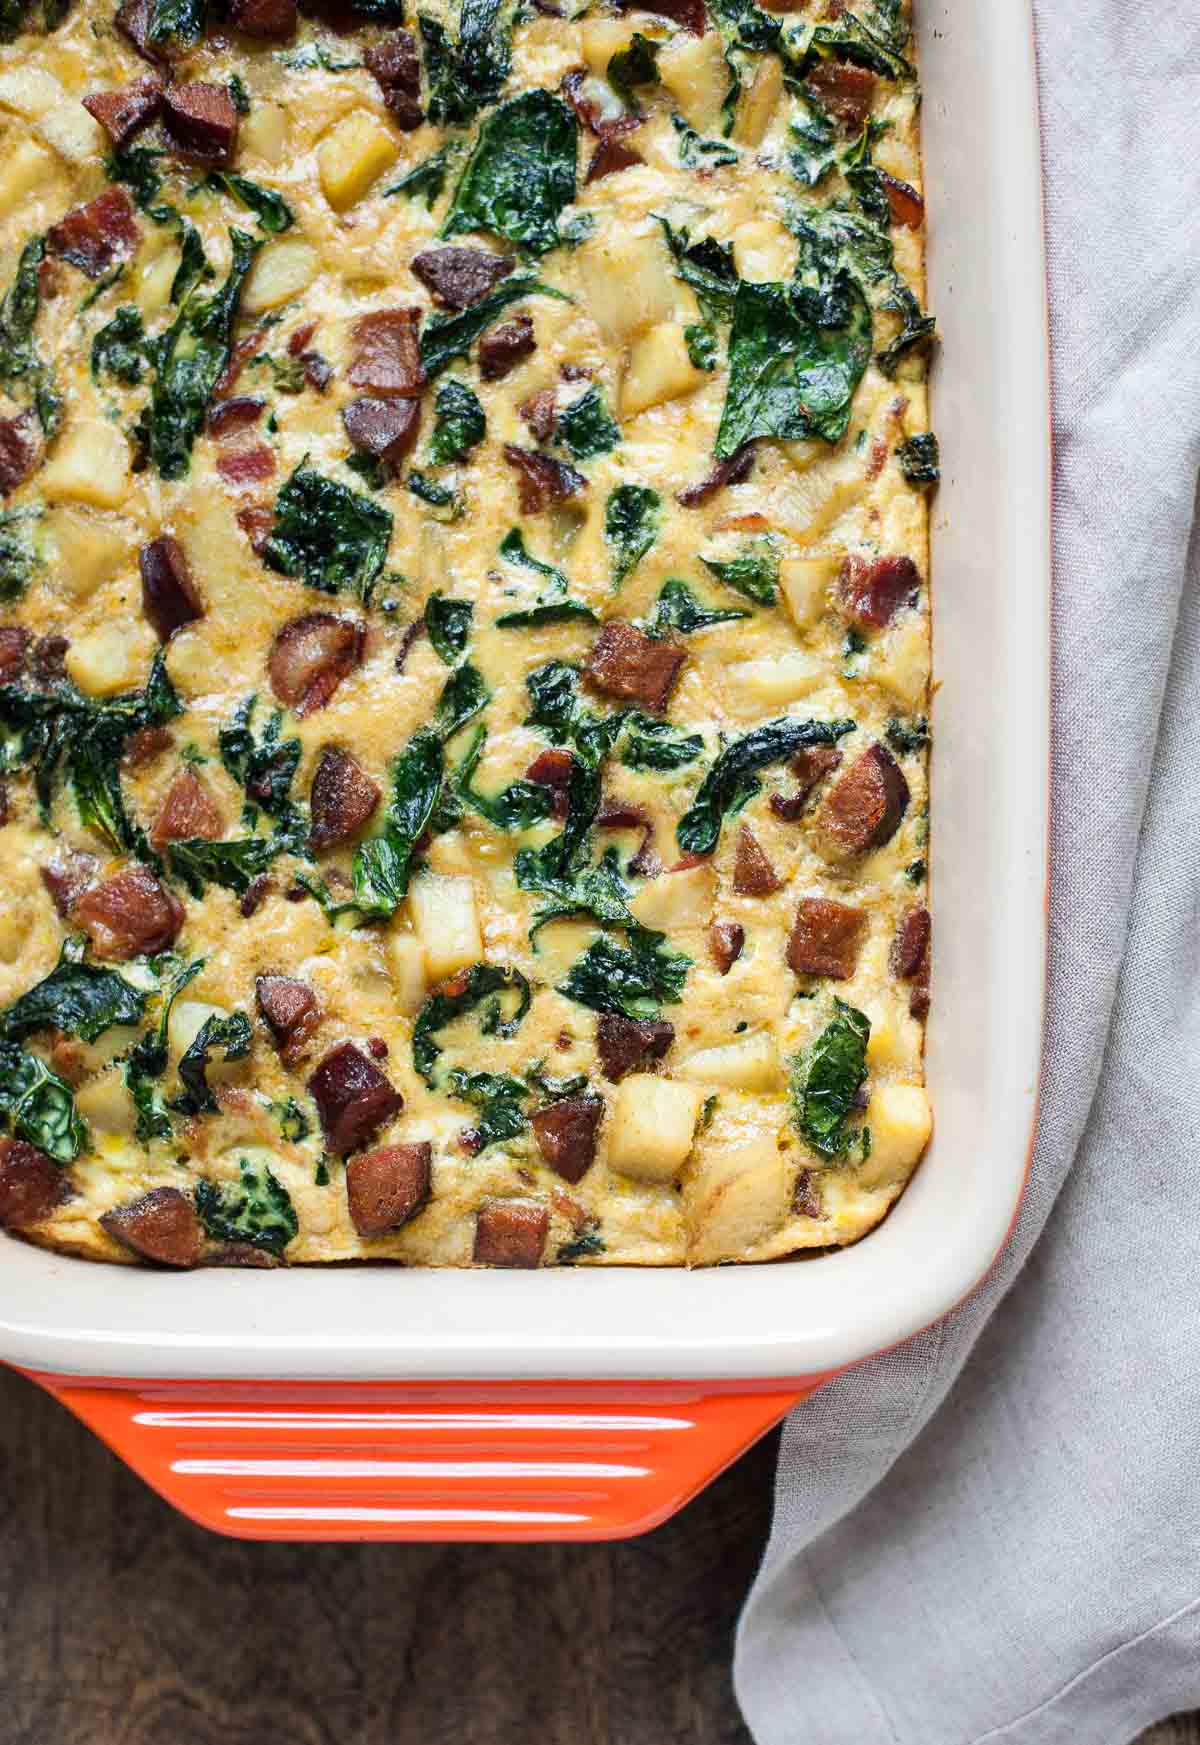 Breakfast Casserole with Bacon, Sausage, Sweet Potato, and Kale | acalculatedwhisk.com